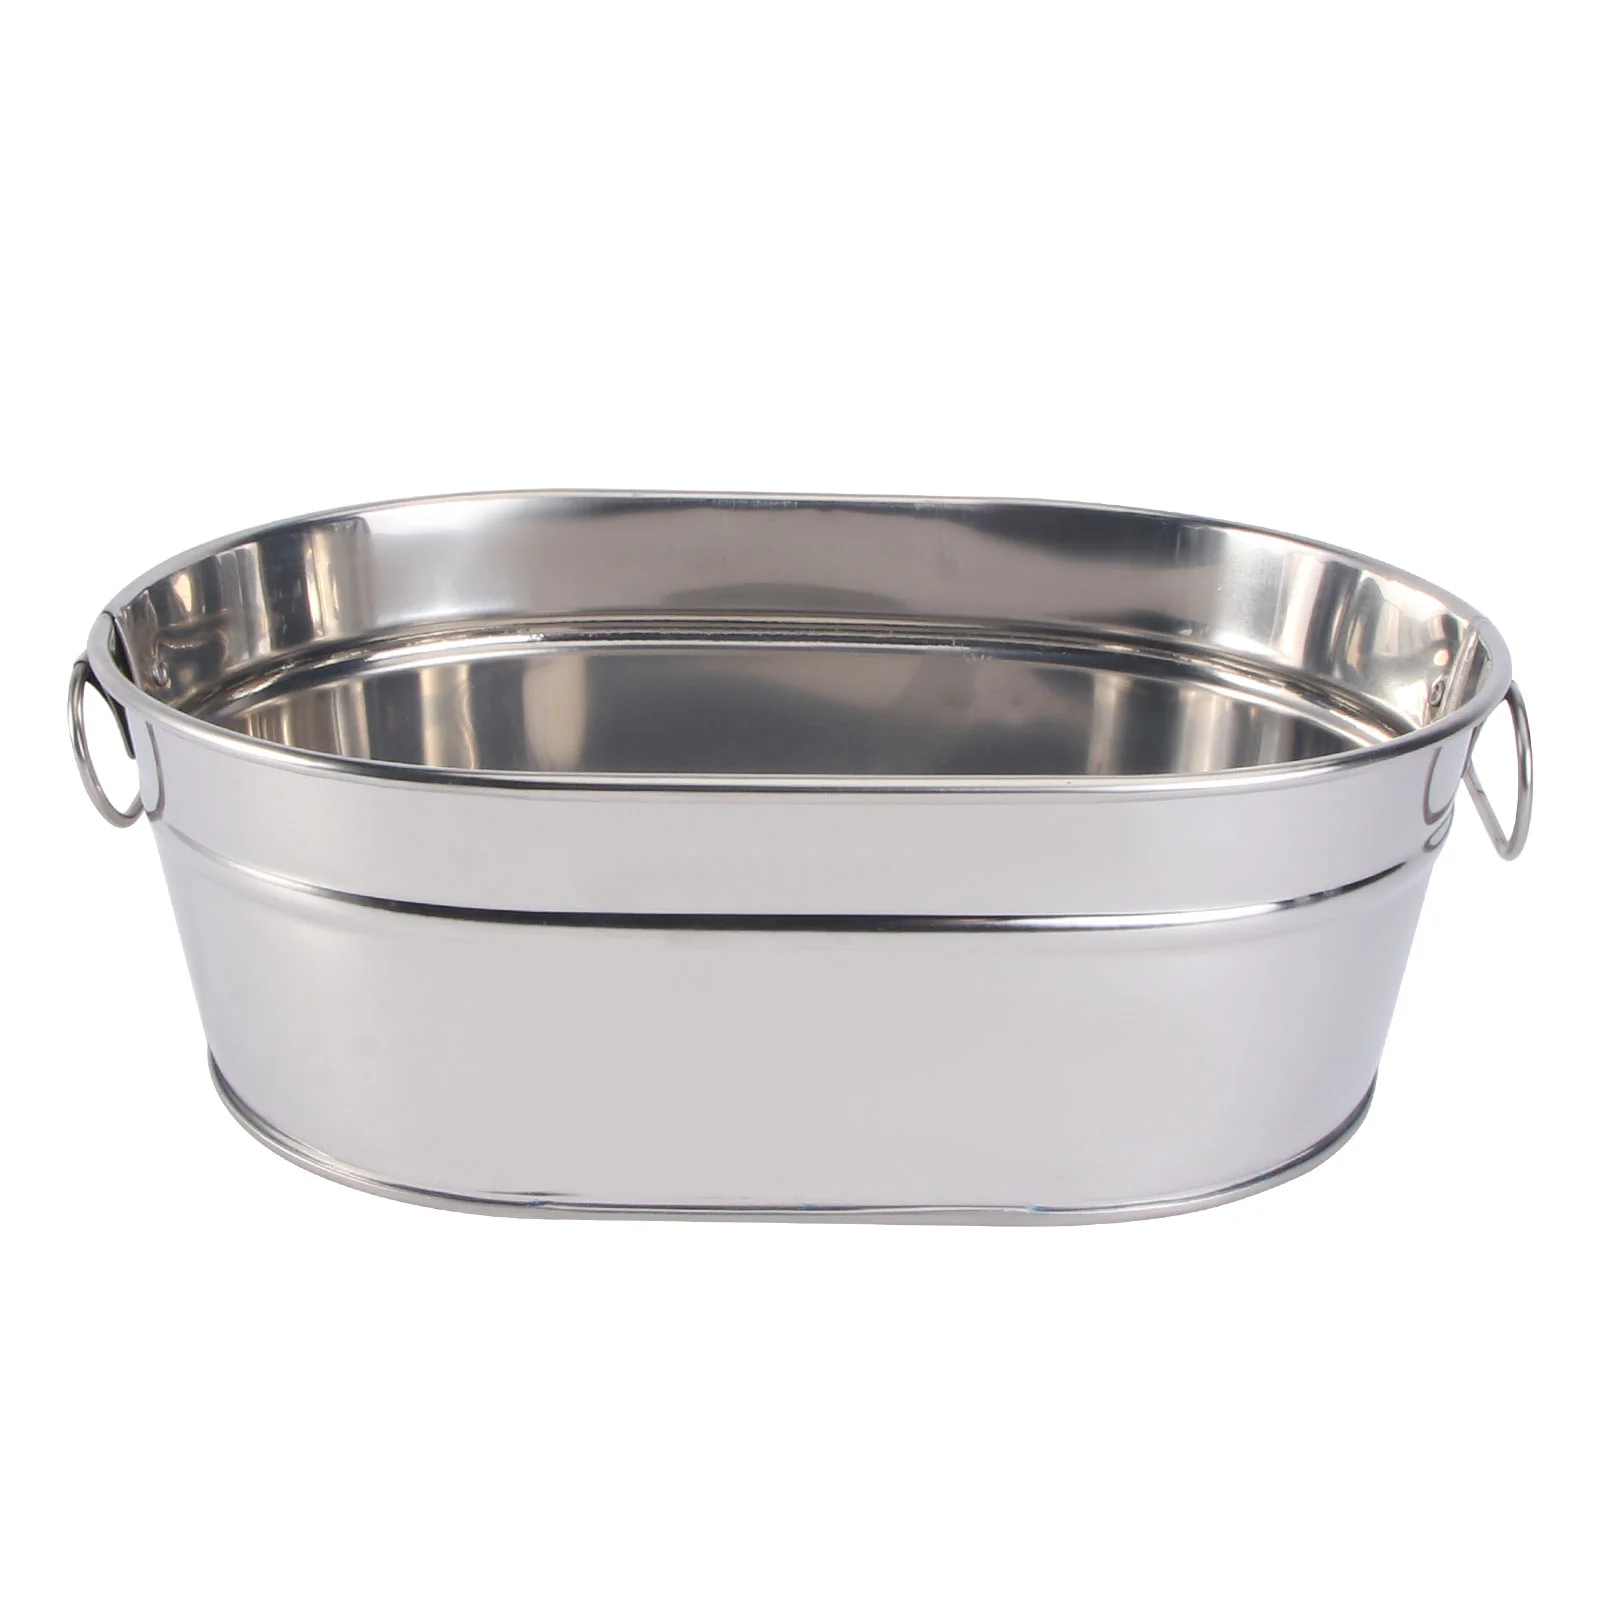 

Bucket Tub Metal Ice Galvanized Beverage Drink Steel Oval Seafood Planter Stainless Buckets Container Tin Cooler Serving Pail